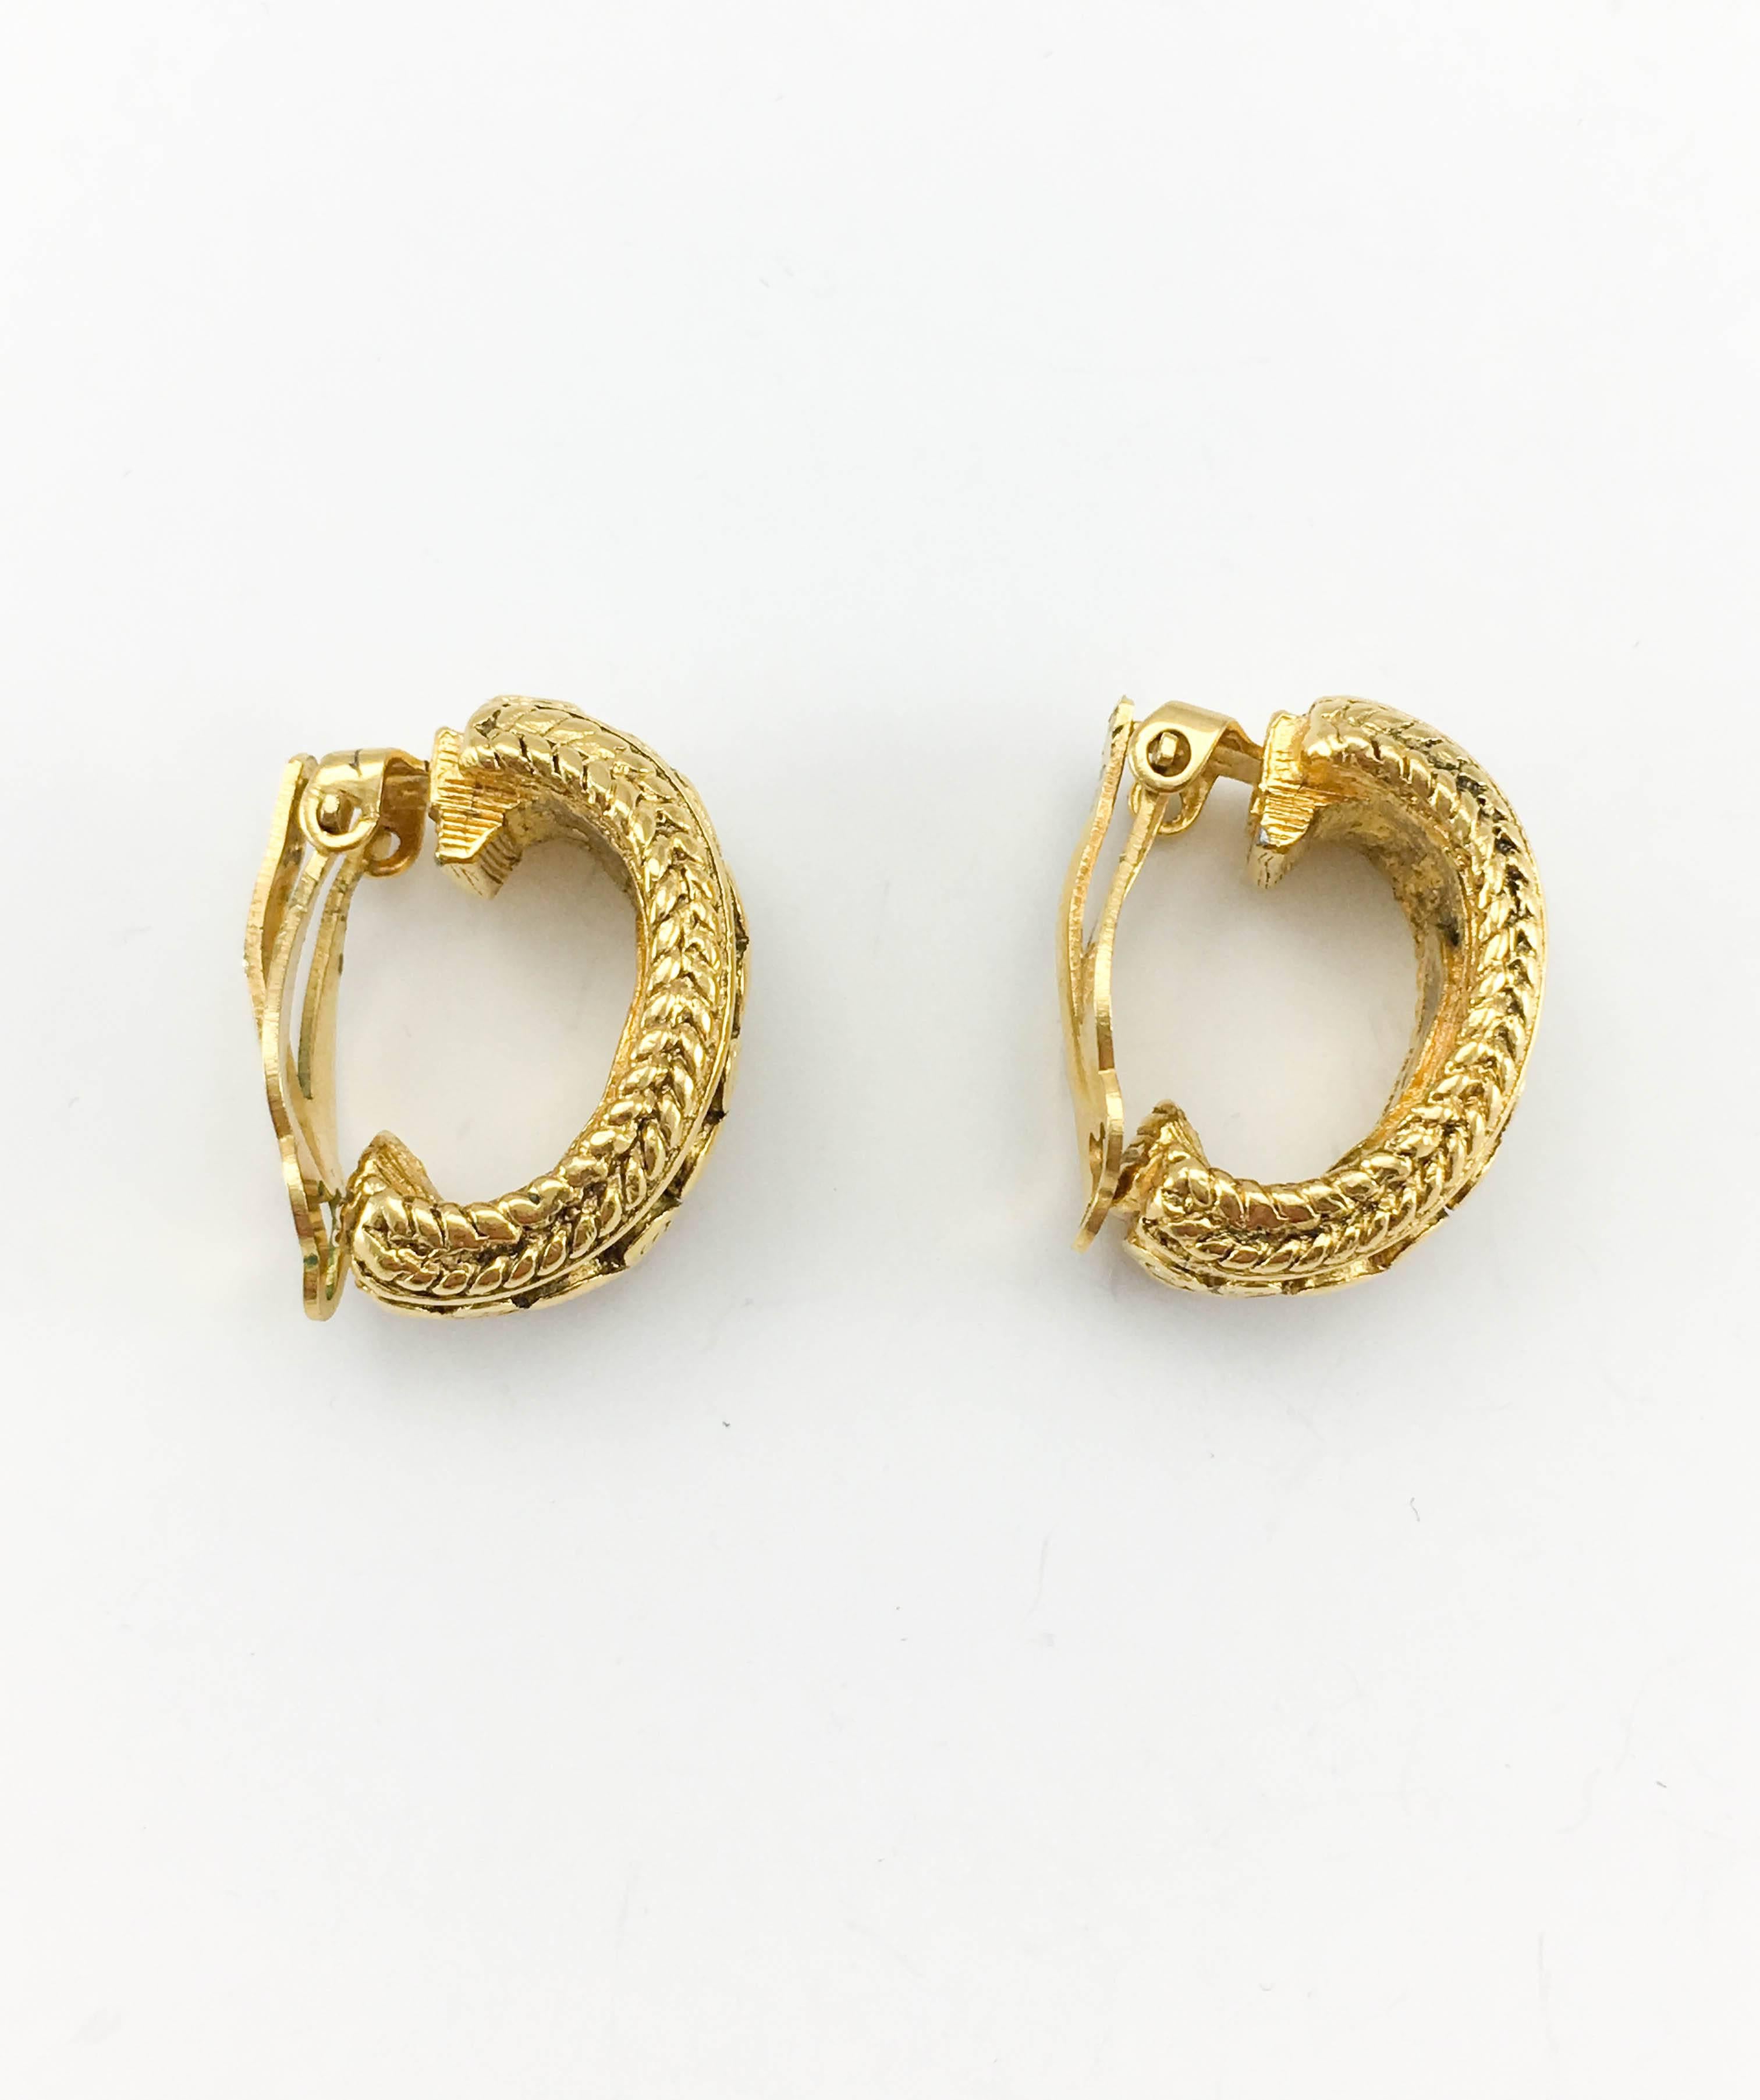 Chanel Large Baroque-Inspired Gold-Plated Hoop Earrings, 1980s  4